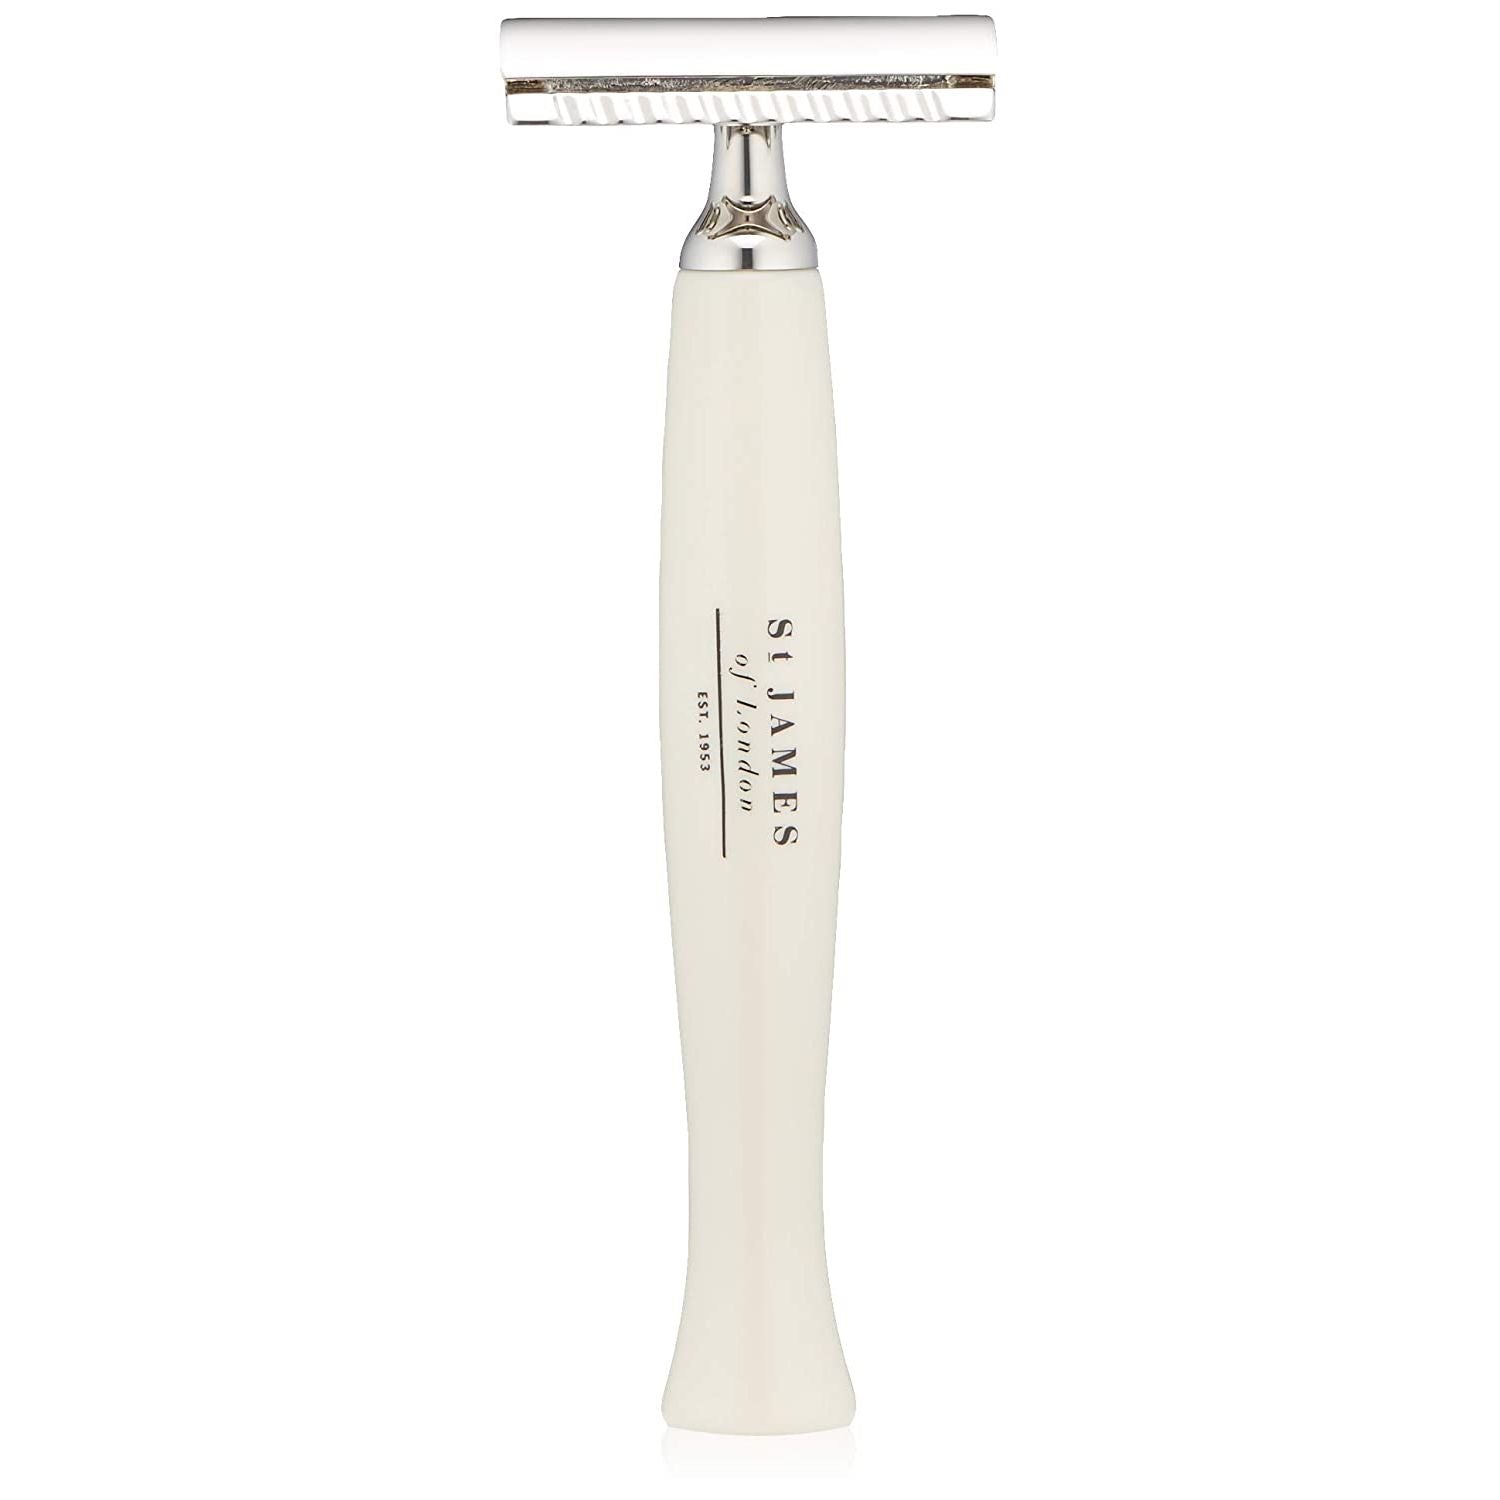 "Cheeky B'stard" Handcrafted Safety Razor in Ivory by St. James of London